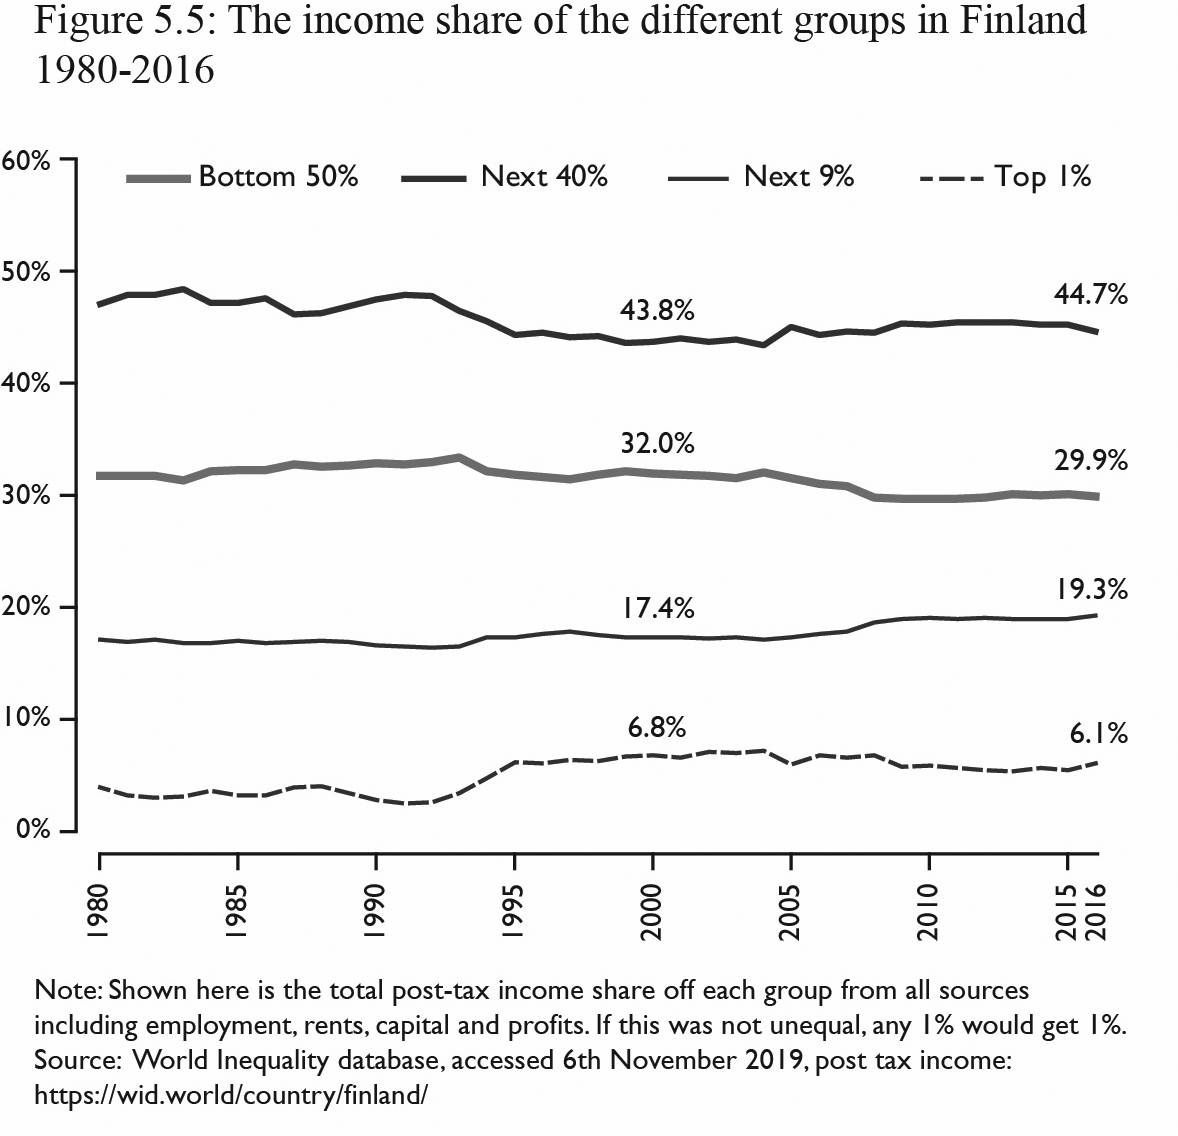 Figure 5.5: Note: Shown here is the total post-tax income share of each group from all sources including employment, rents, capital and profits. If this was not unequal, any 1% would get 1%. Source: World Inequality database, accessed 6th November 2019, post tax income, https://wid.world/country/finland/